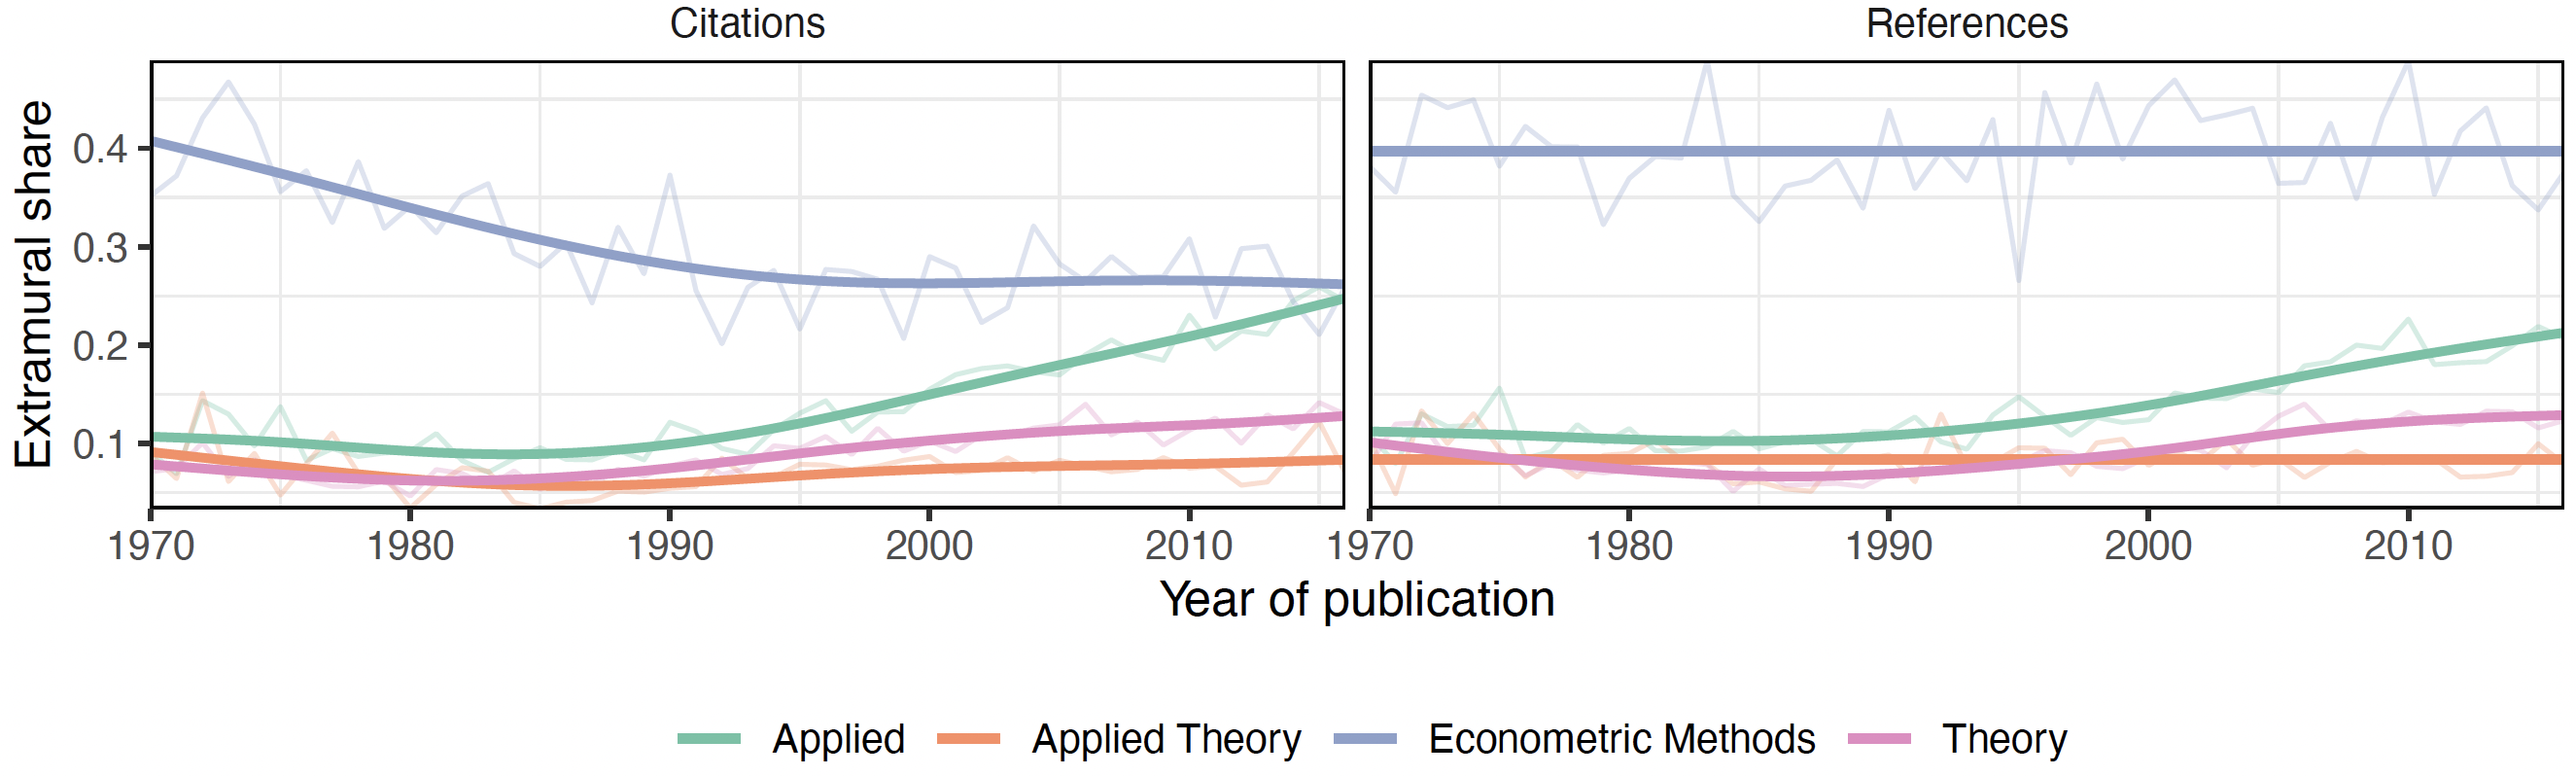 Figure 3 Share of extramural citations and references across fields of economics research